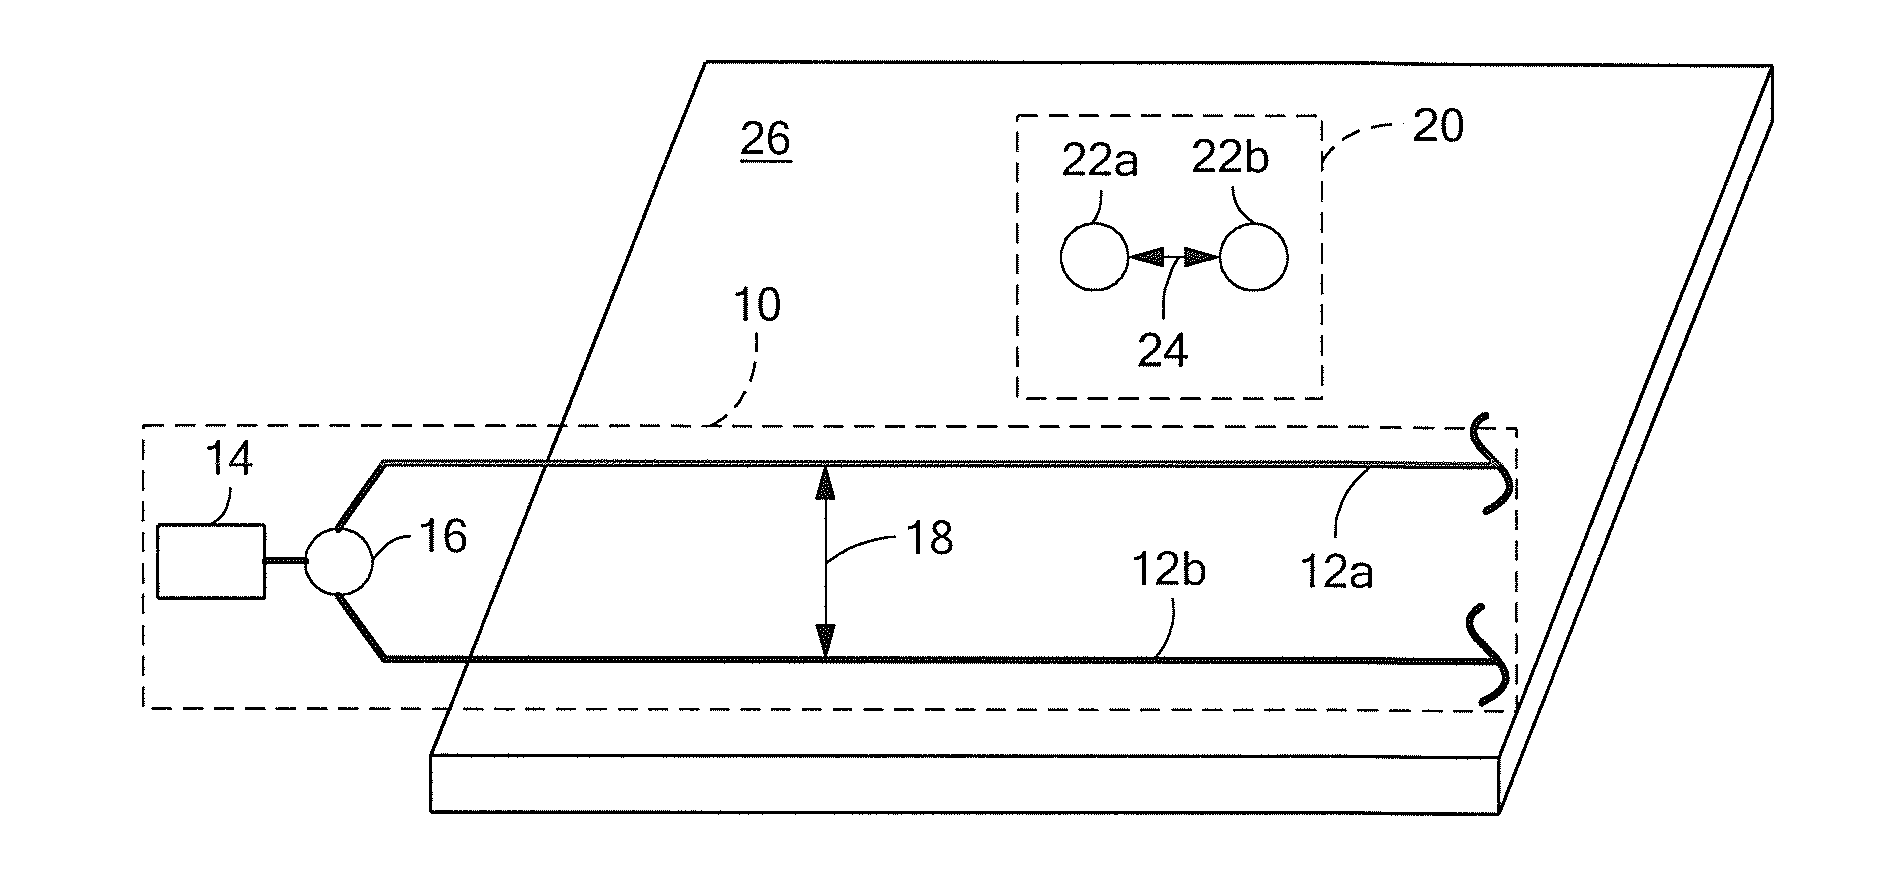 Method and apparatus for Anti-biofouling of a protected surface in liquid environments